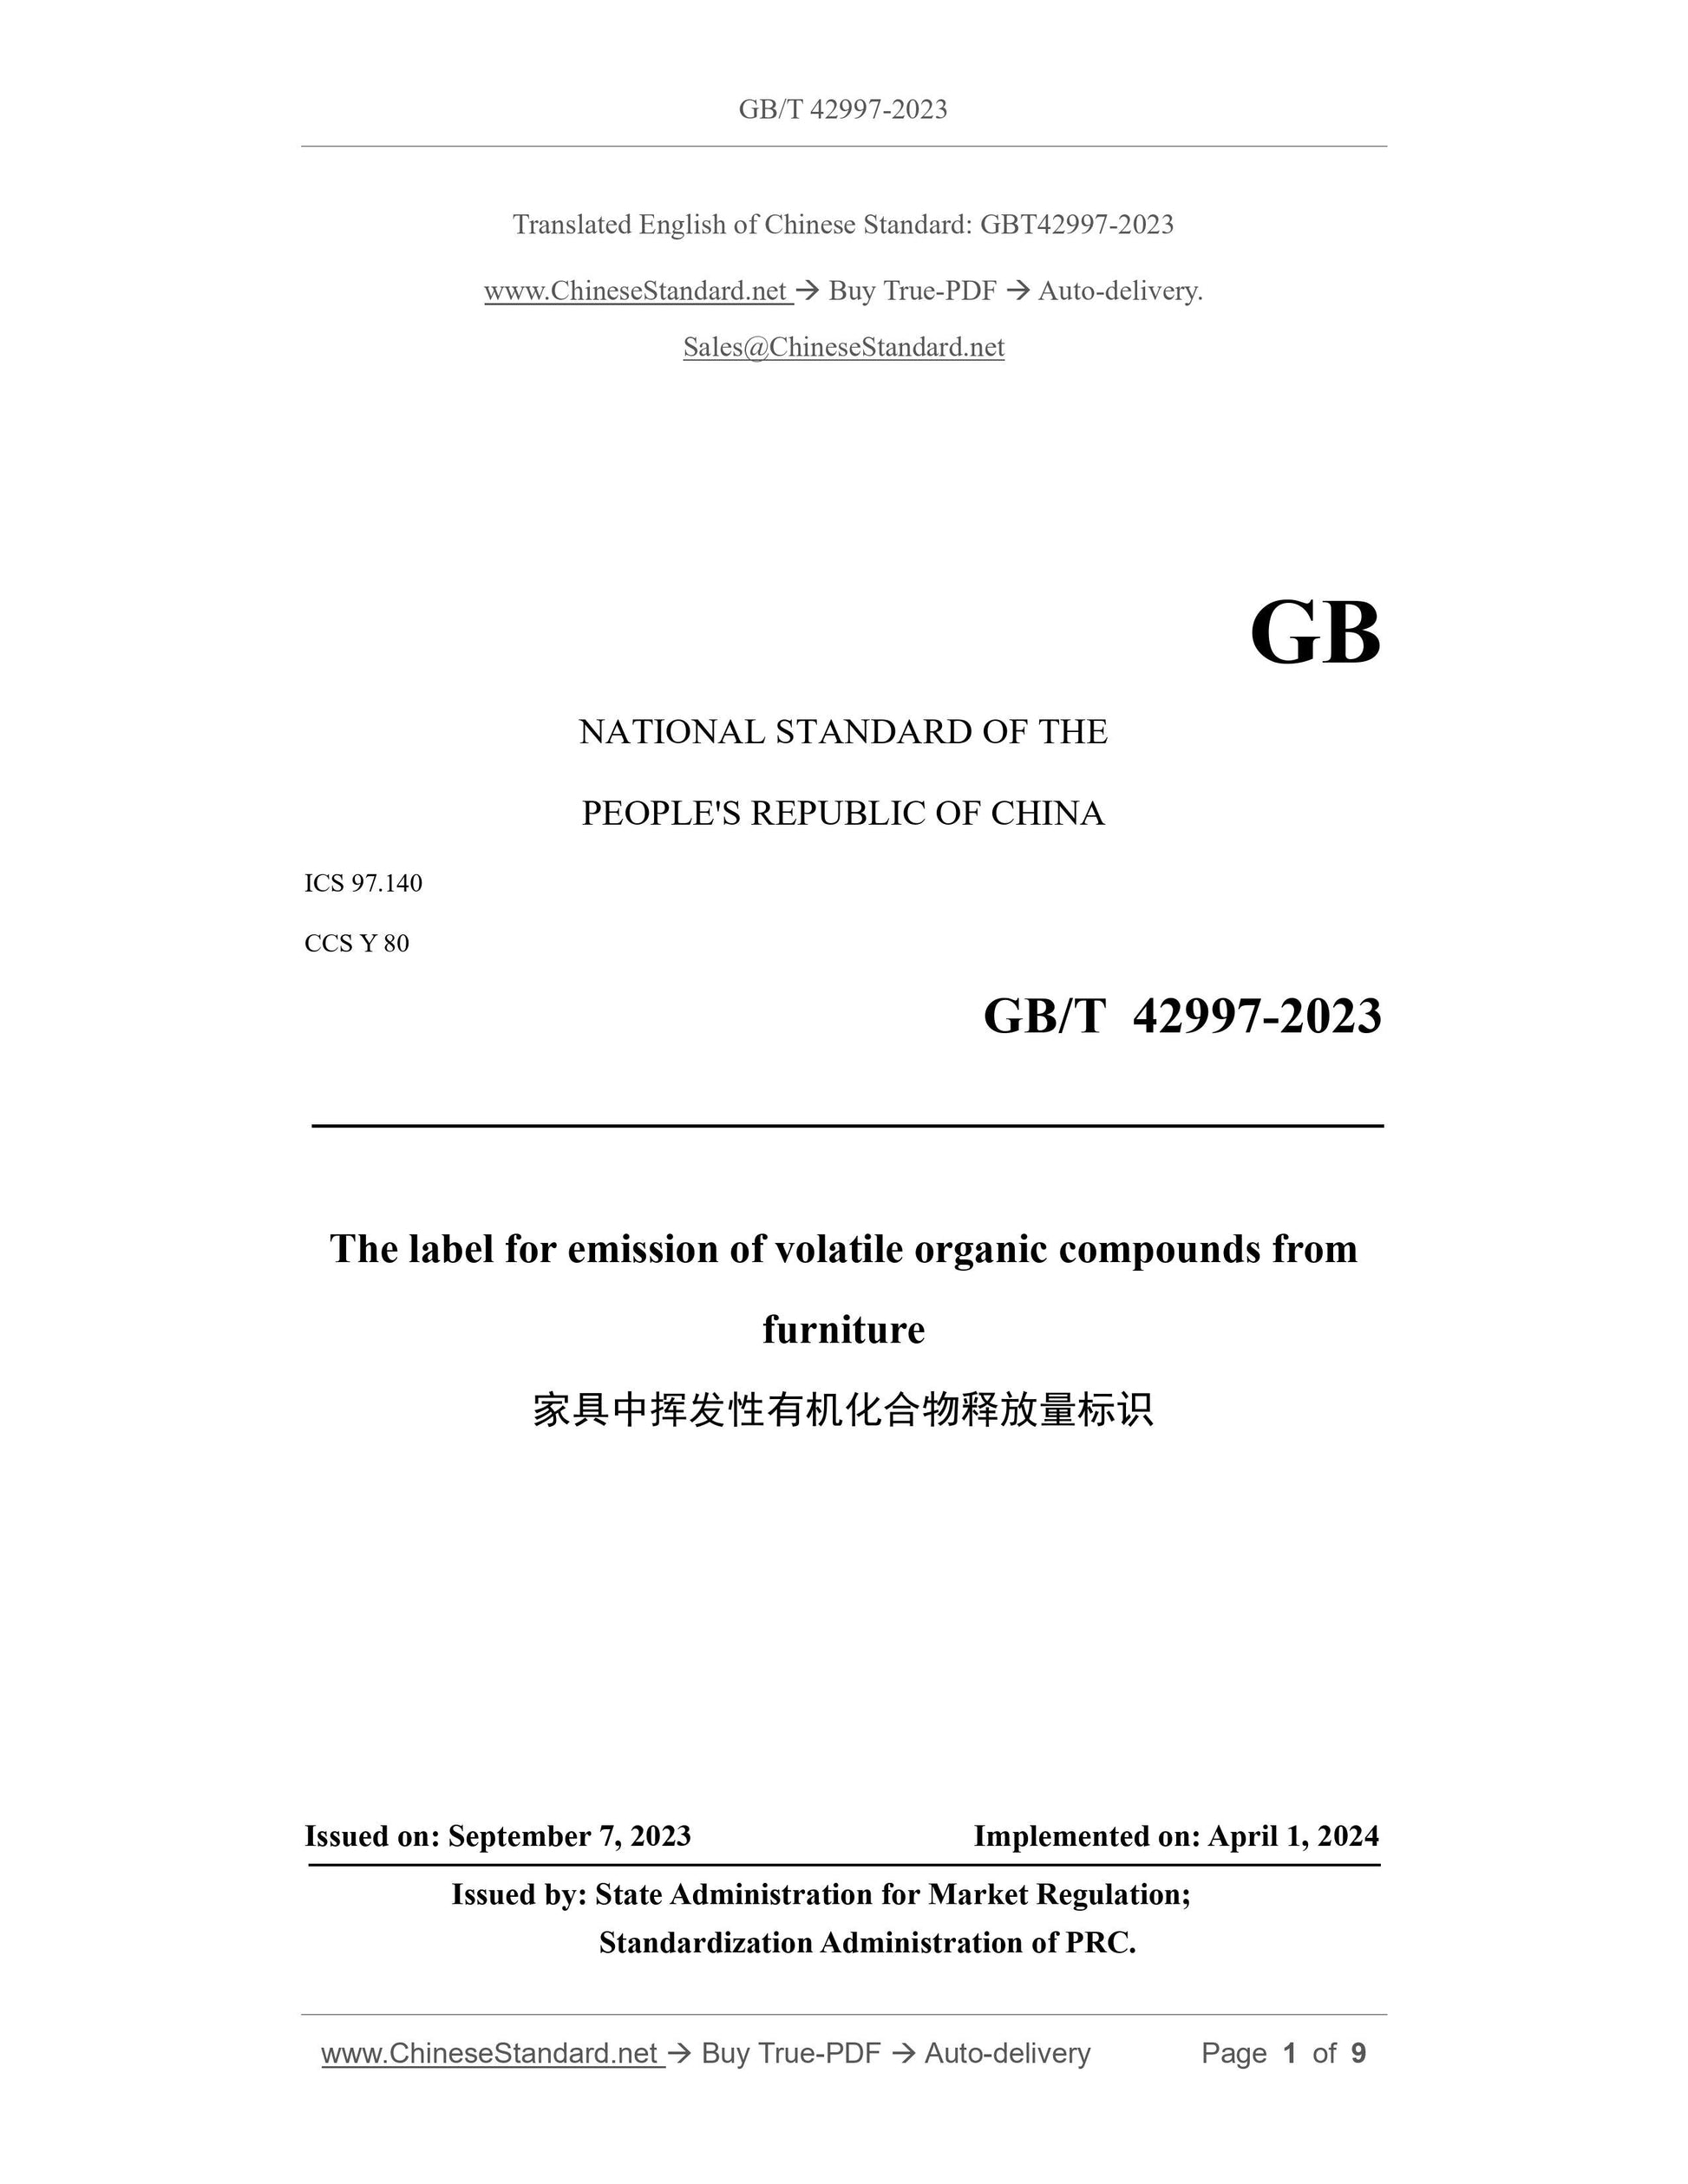 GB/T 42997-2023 Page 1